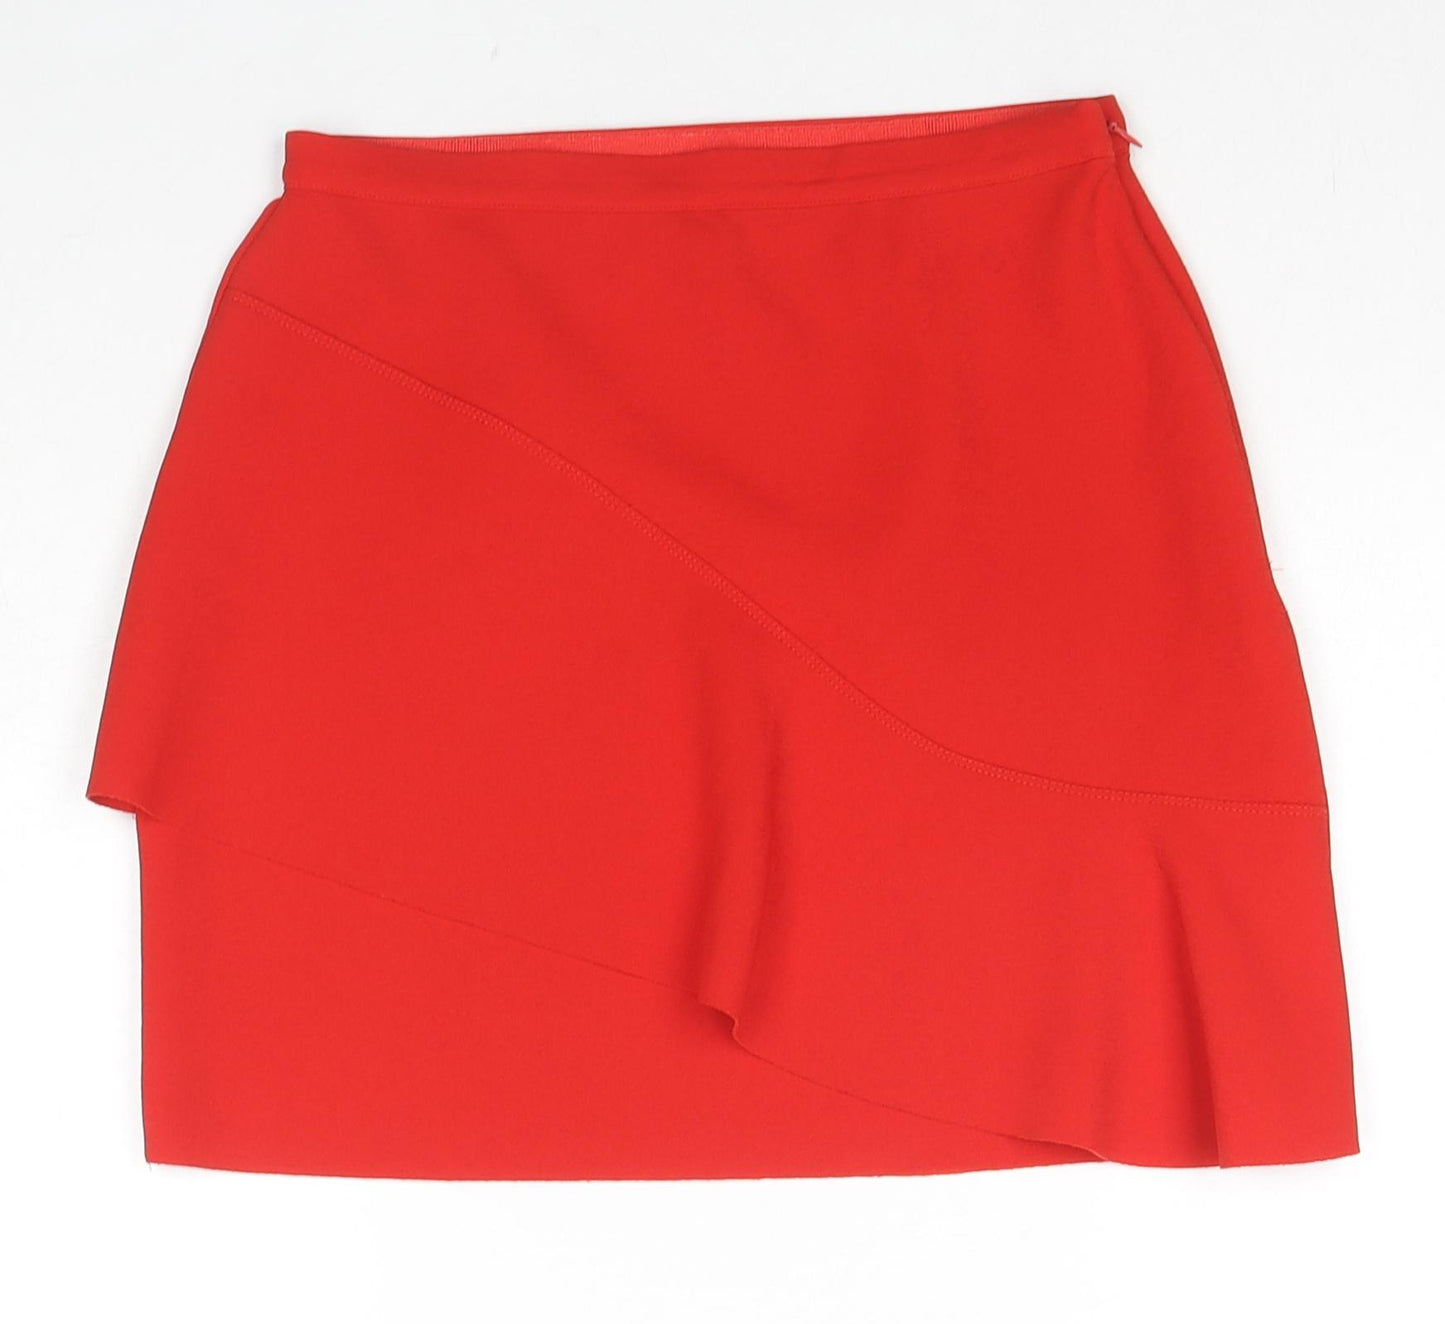 Topshop Womens Red Polyester A-Line Skirt Size 8 Zip